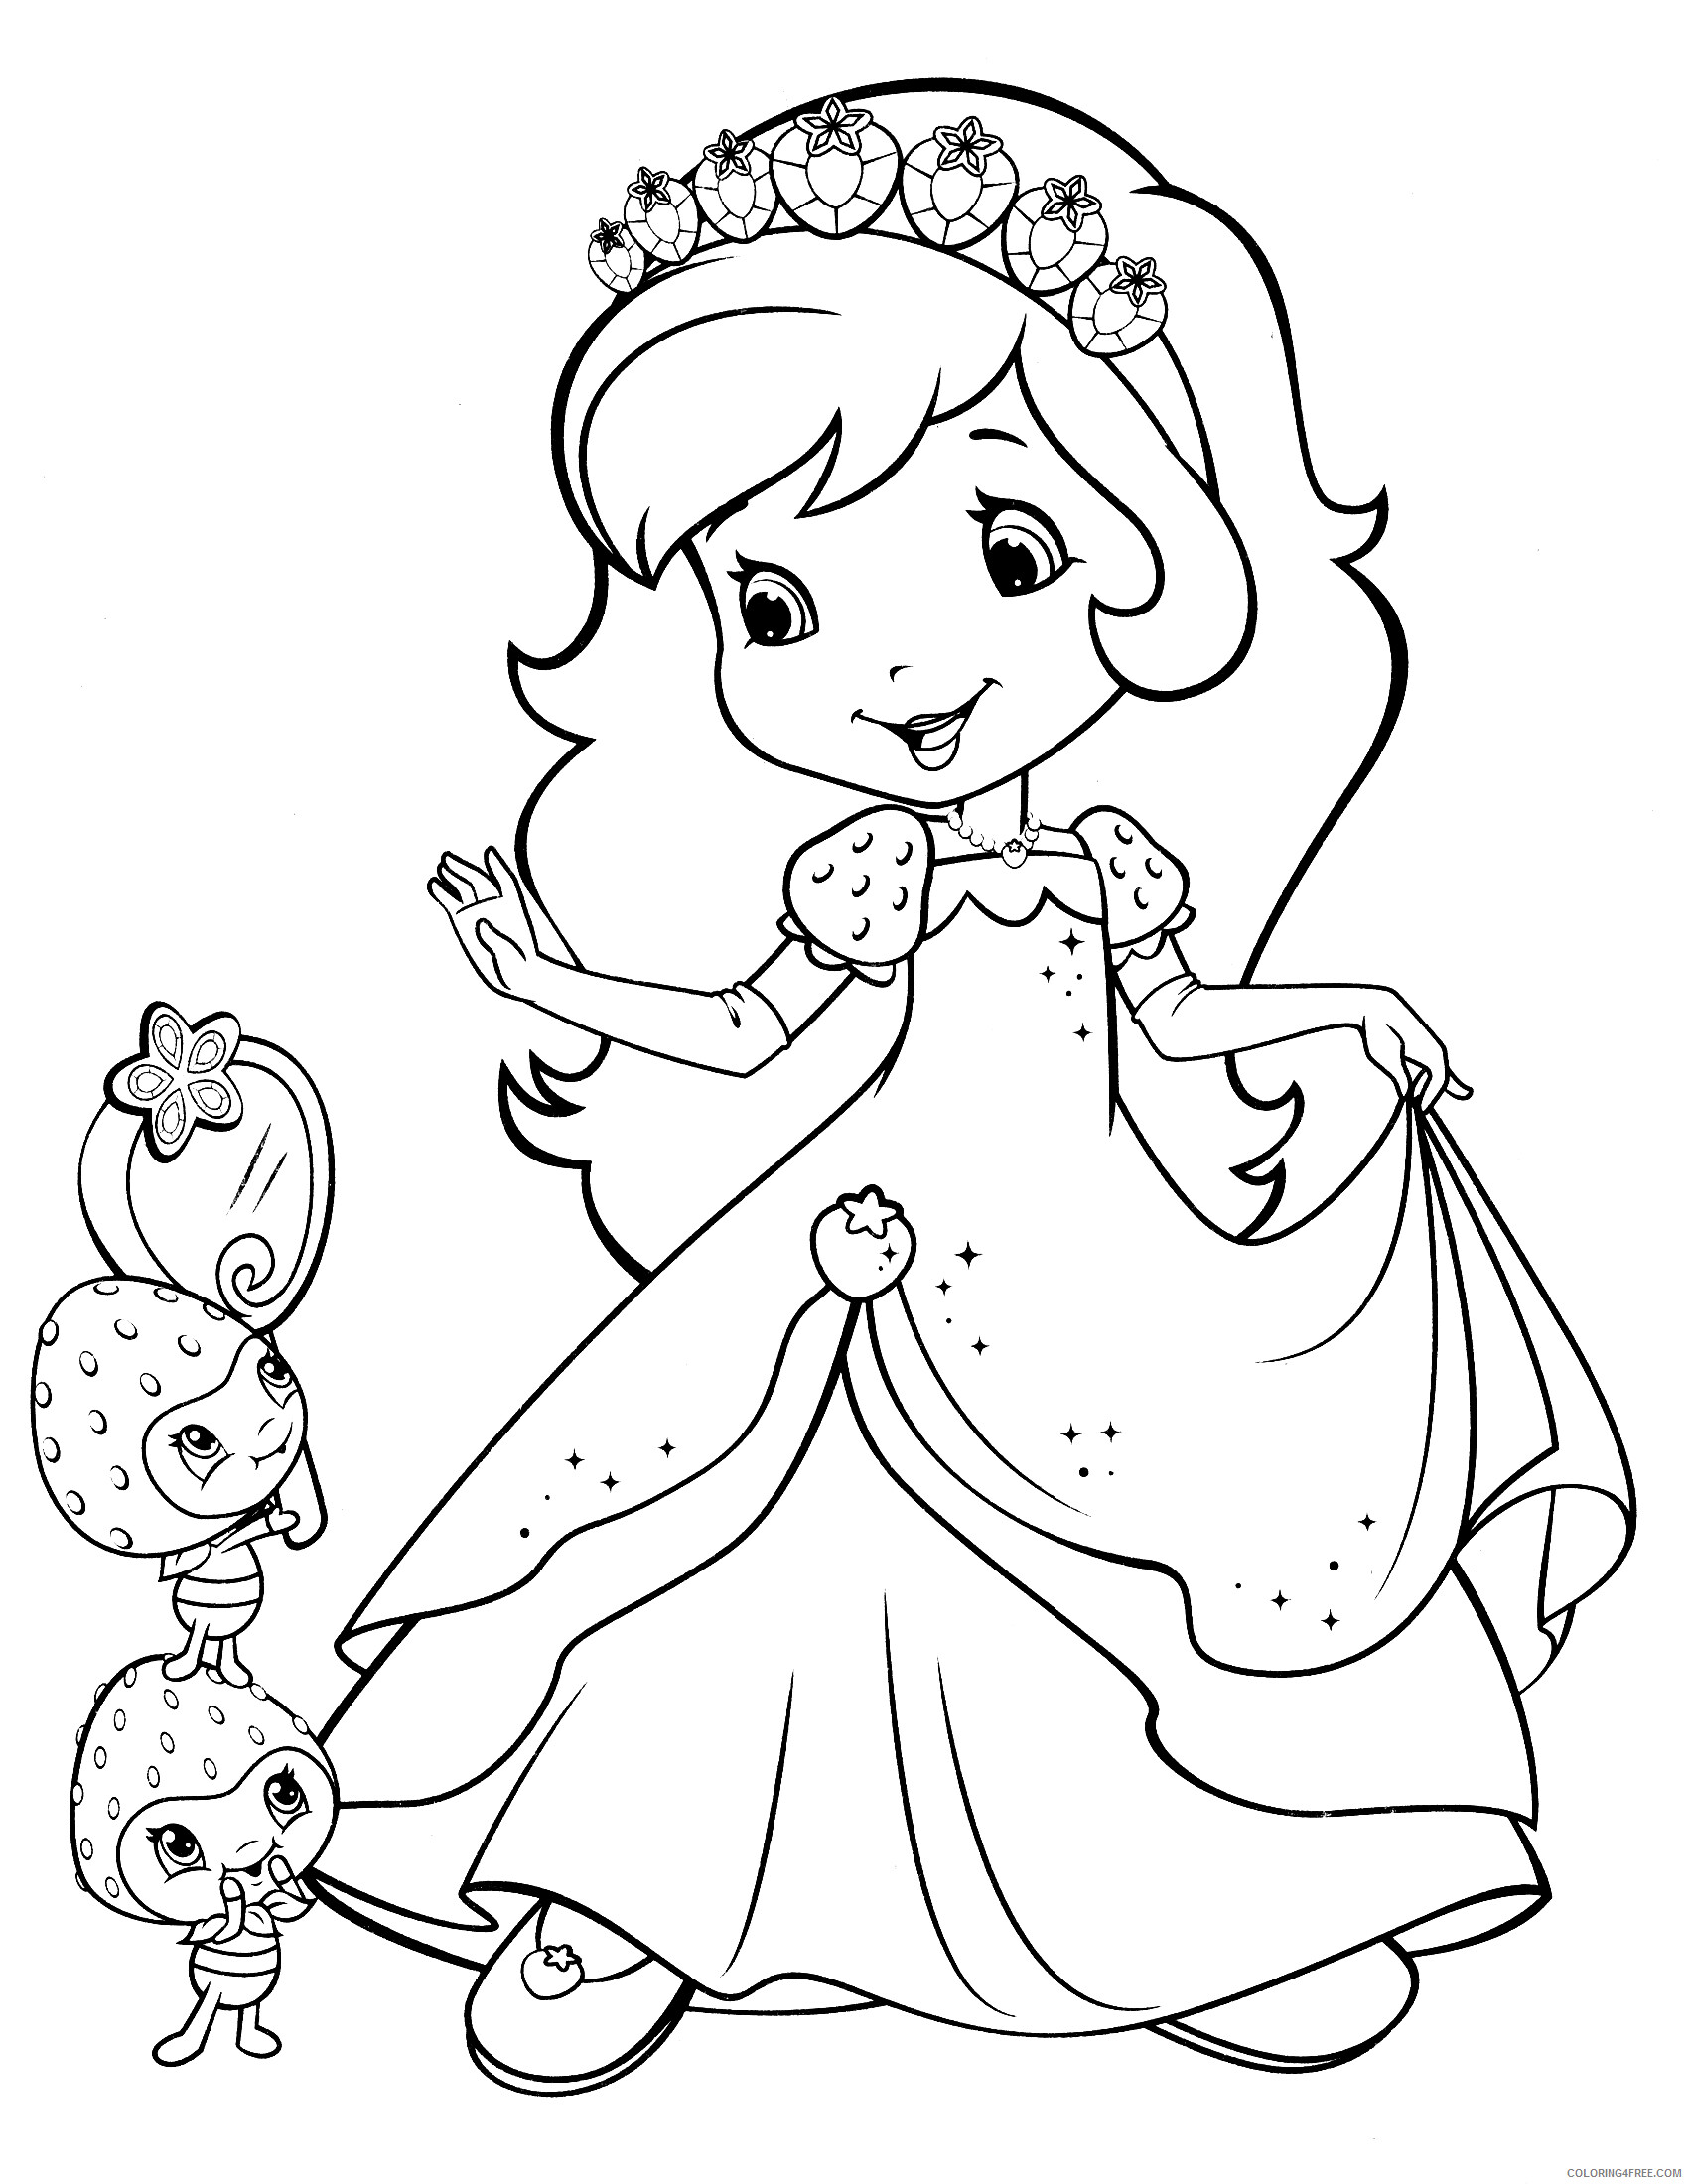 Strawberry Shortcake Coloring Pages TV Film Dress Printable 2020 08214 Coloring4free